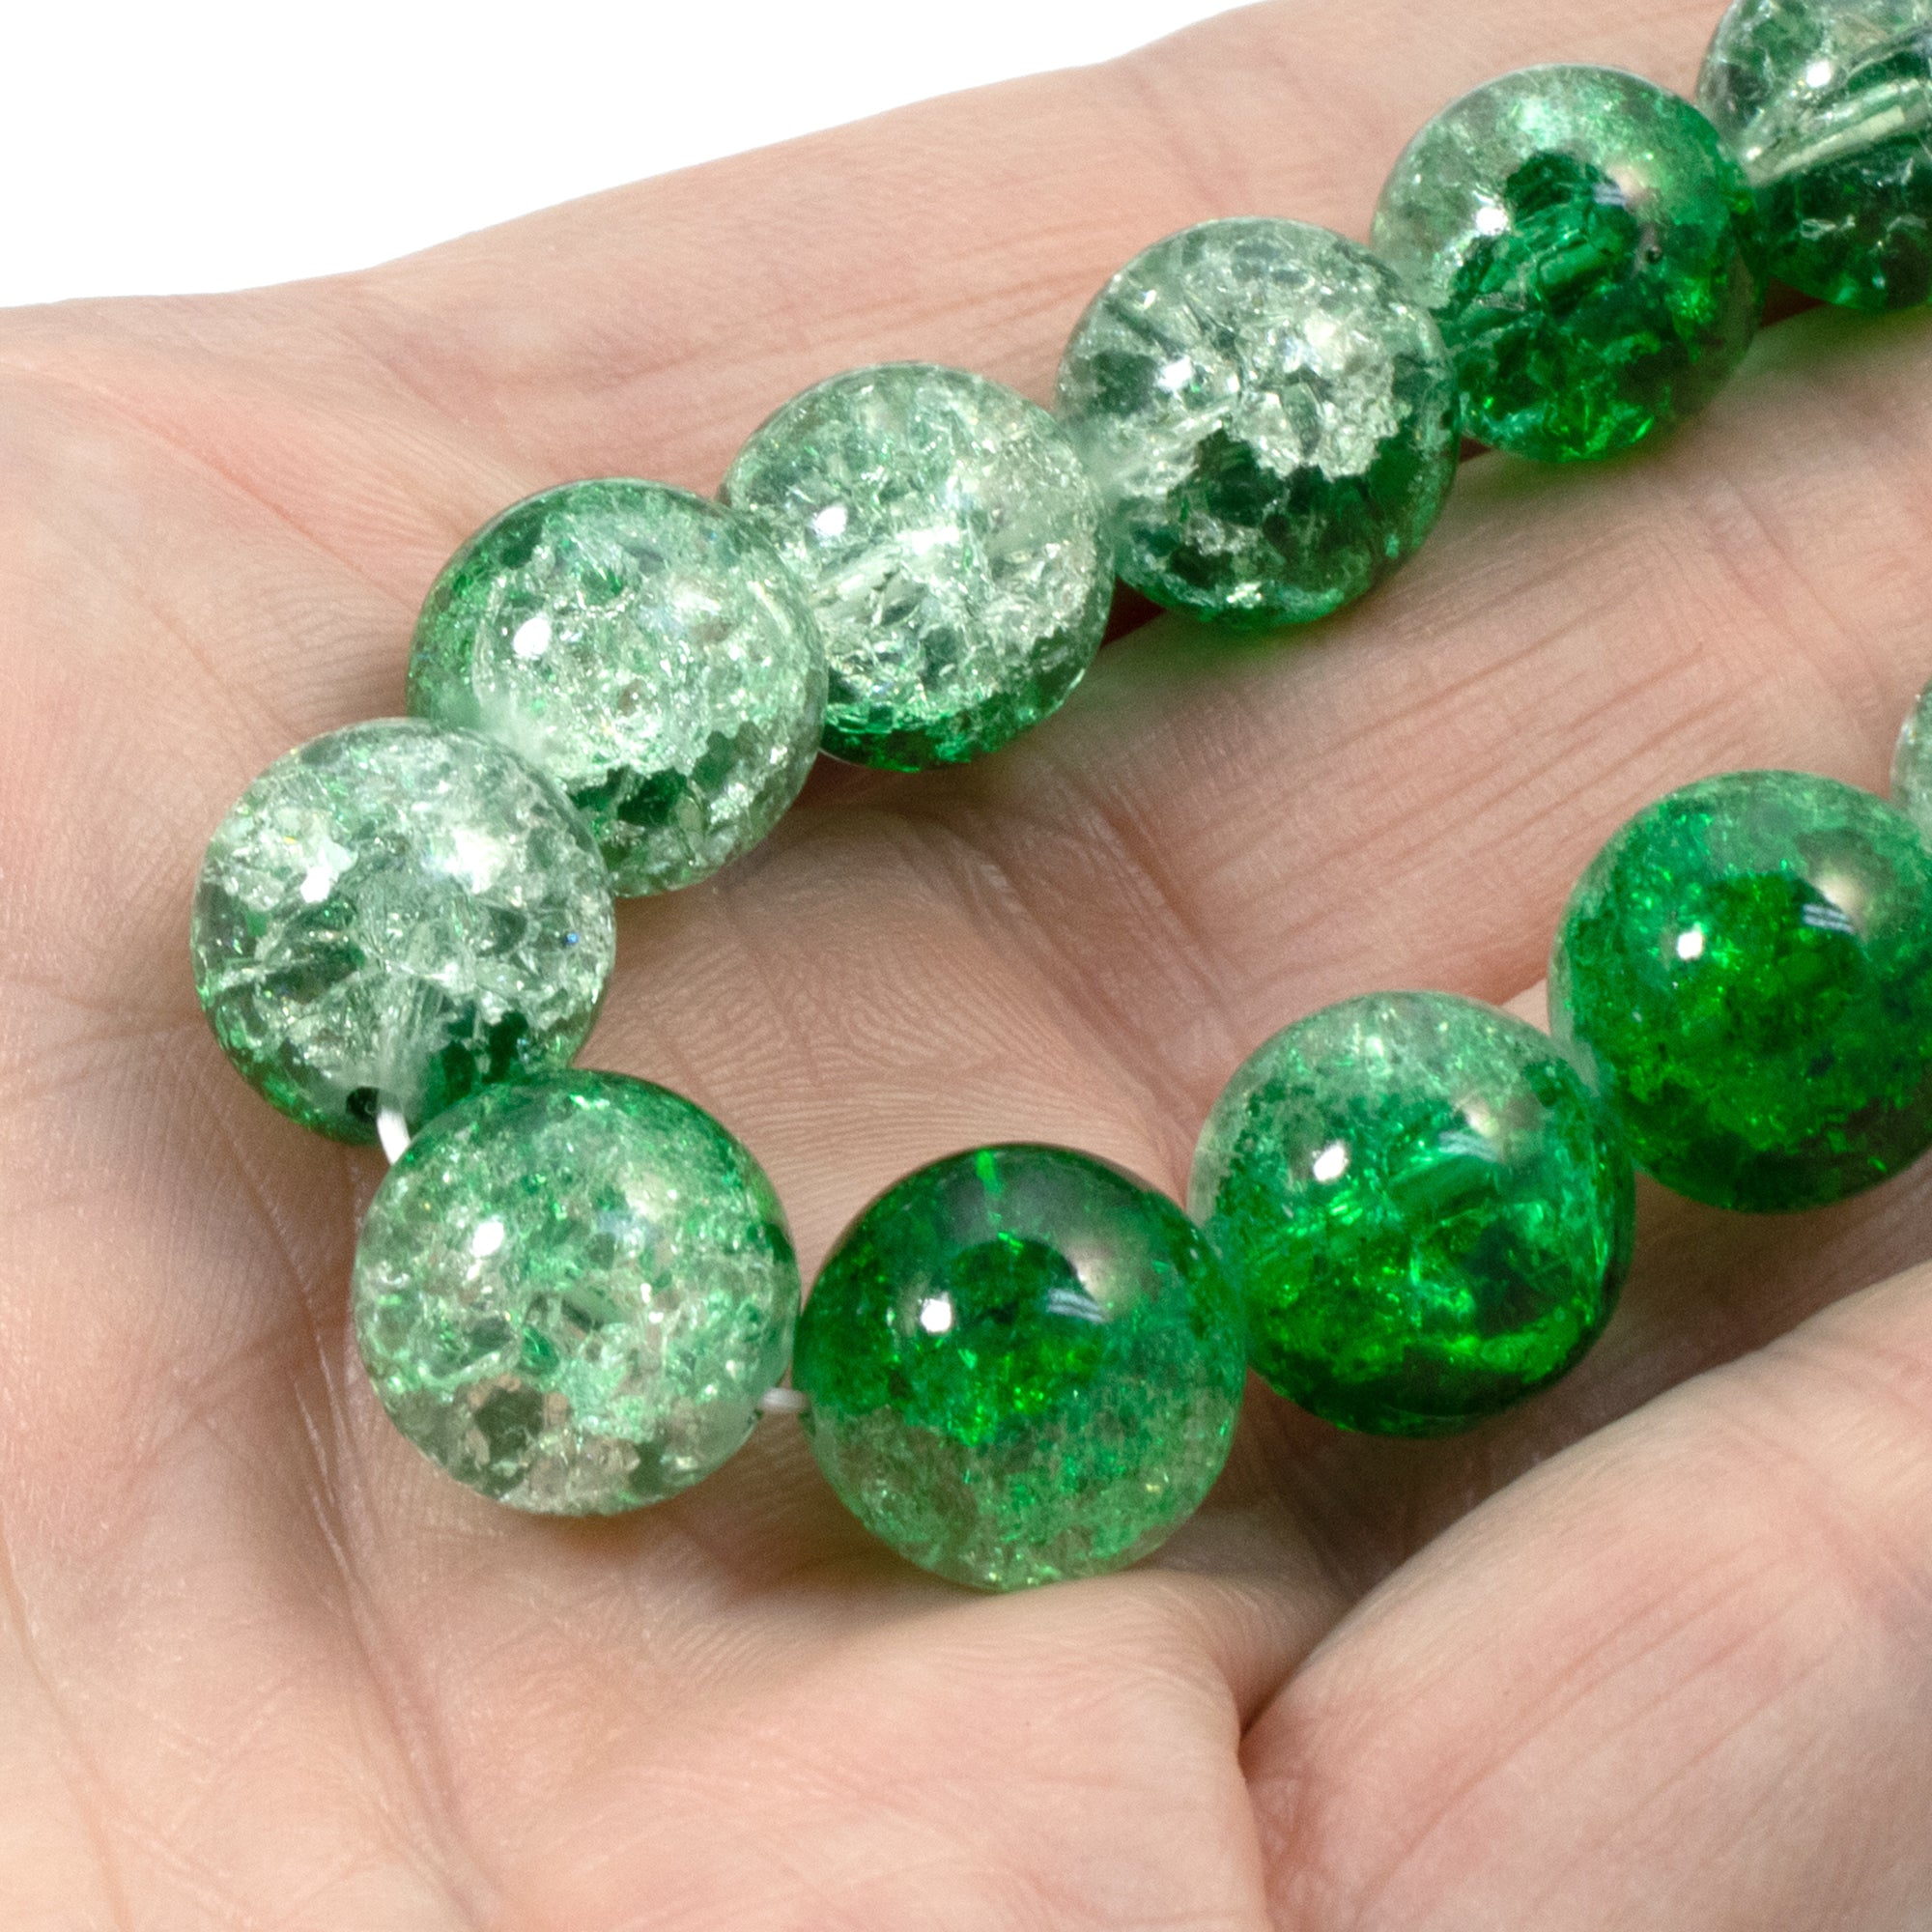 Bright Green 10mm Round Glass Crackle Beads | Hackberry Creek